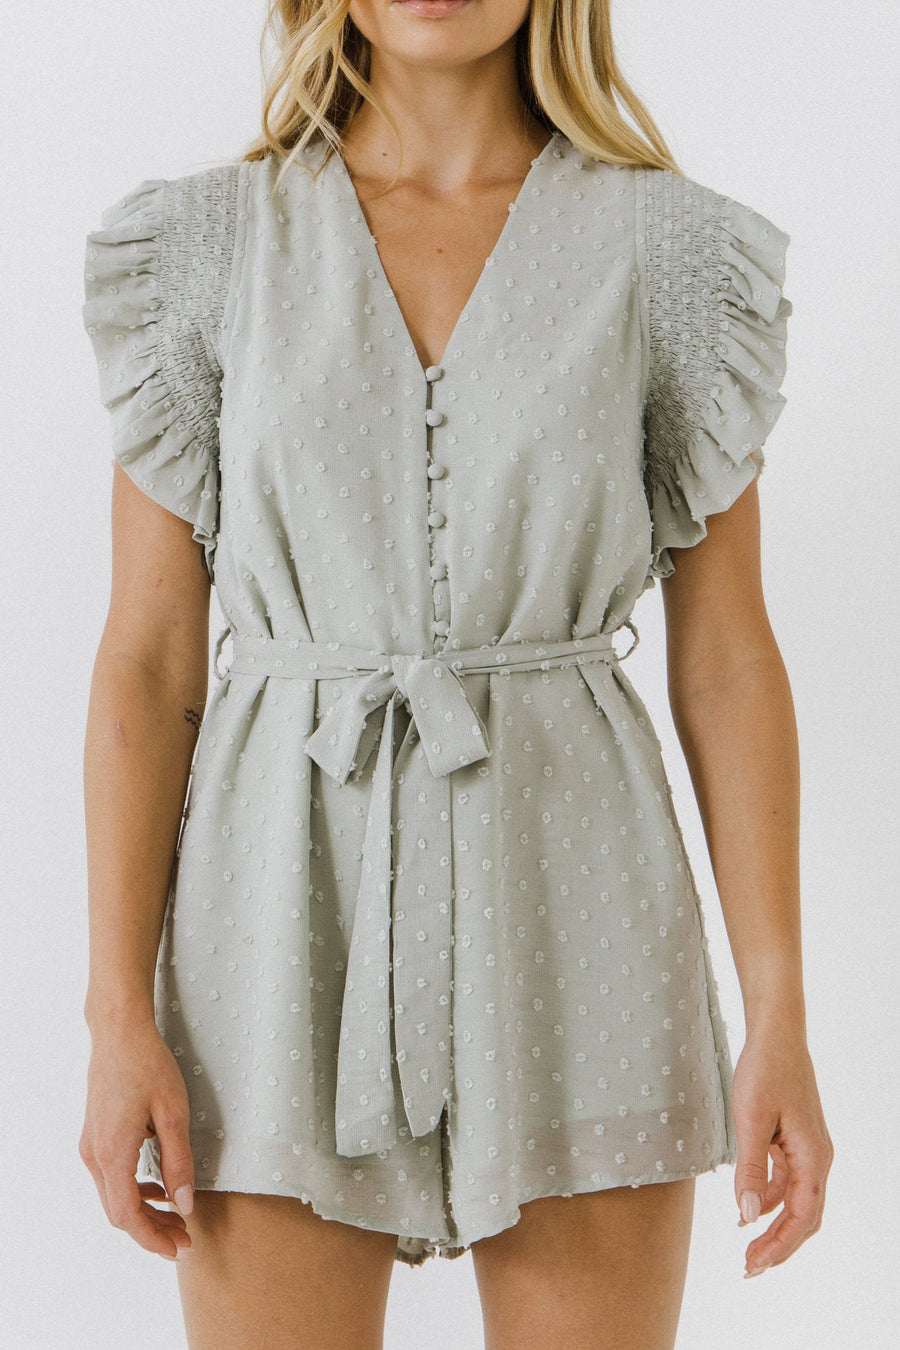 FREE THE ROSES-Swiss Dot Ruffle Detail Romper-ROMPERS available at Objectrare